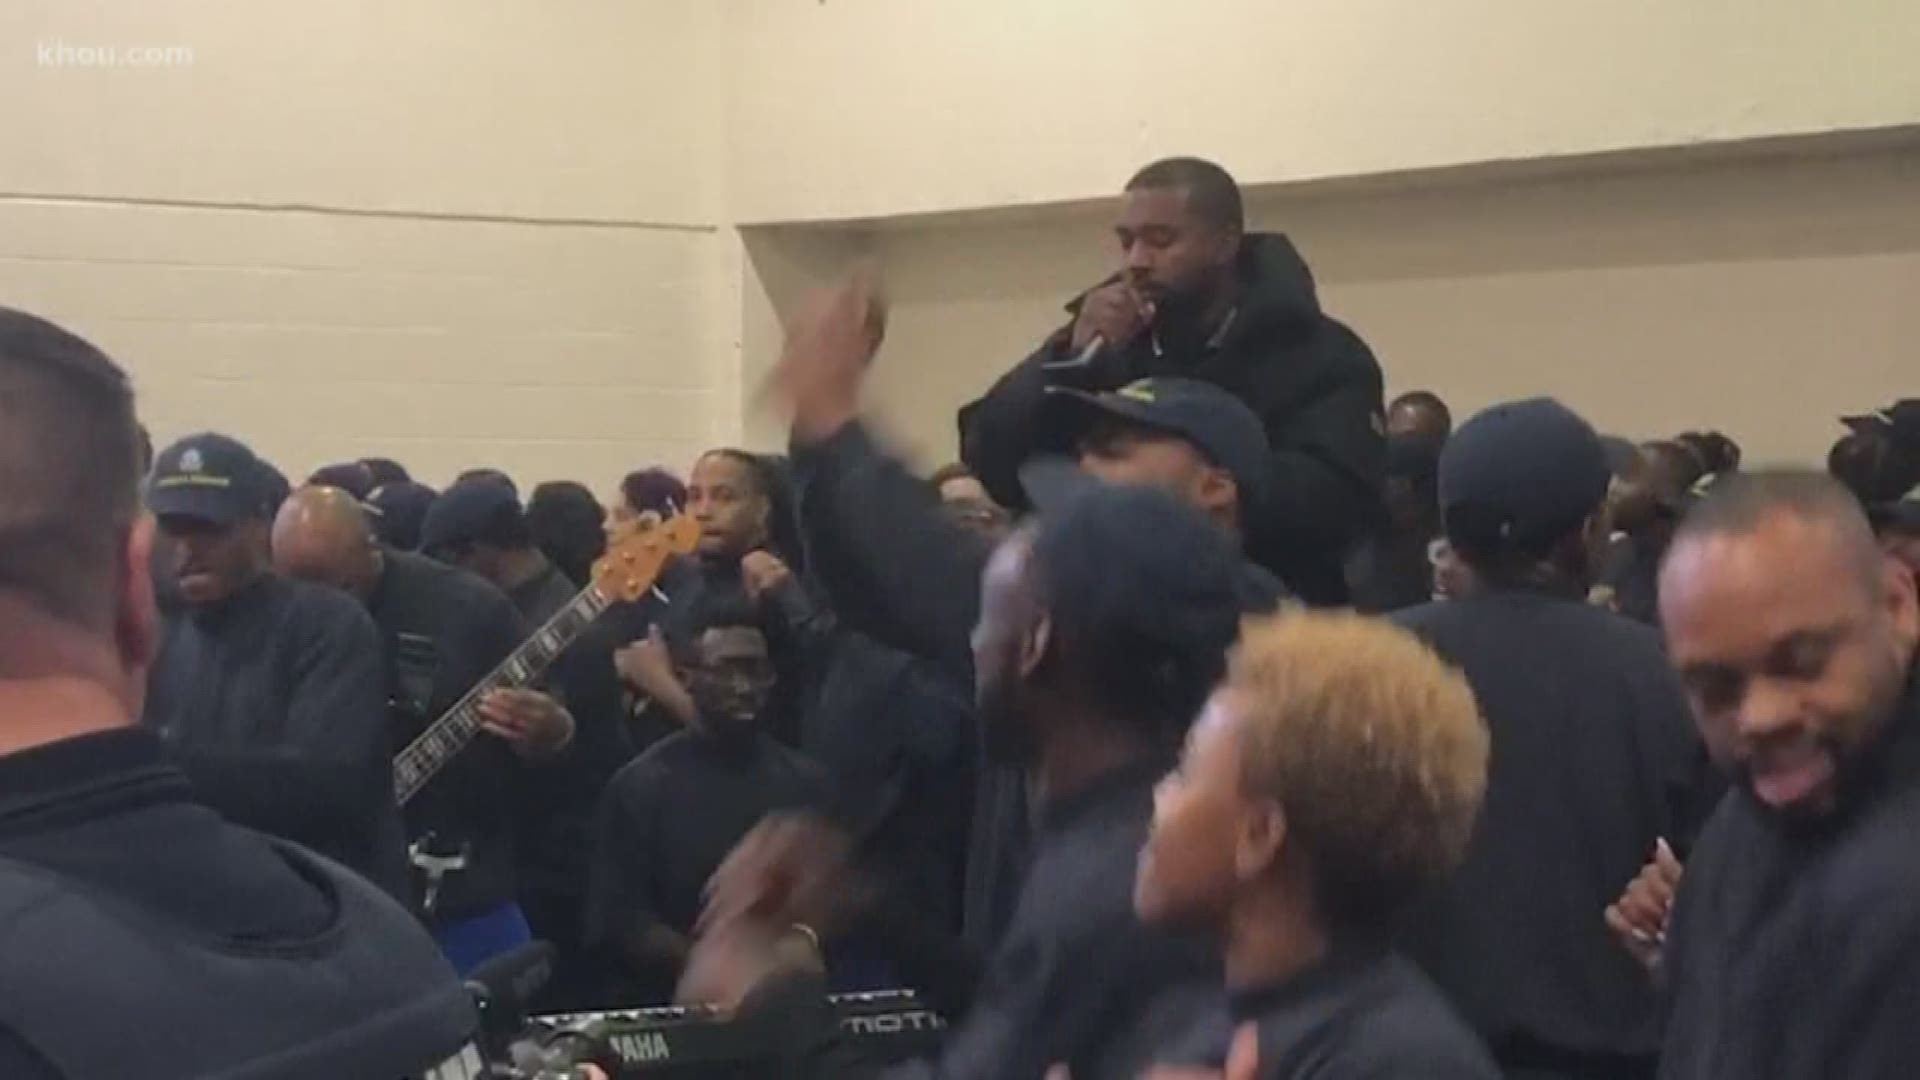 Rap superstar Kanye West made a surprise appearance at the Harris County Jail on Friday.